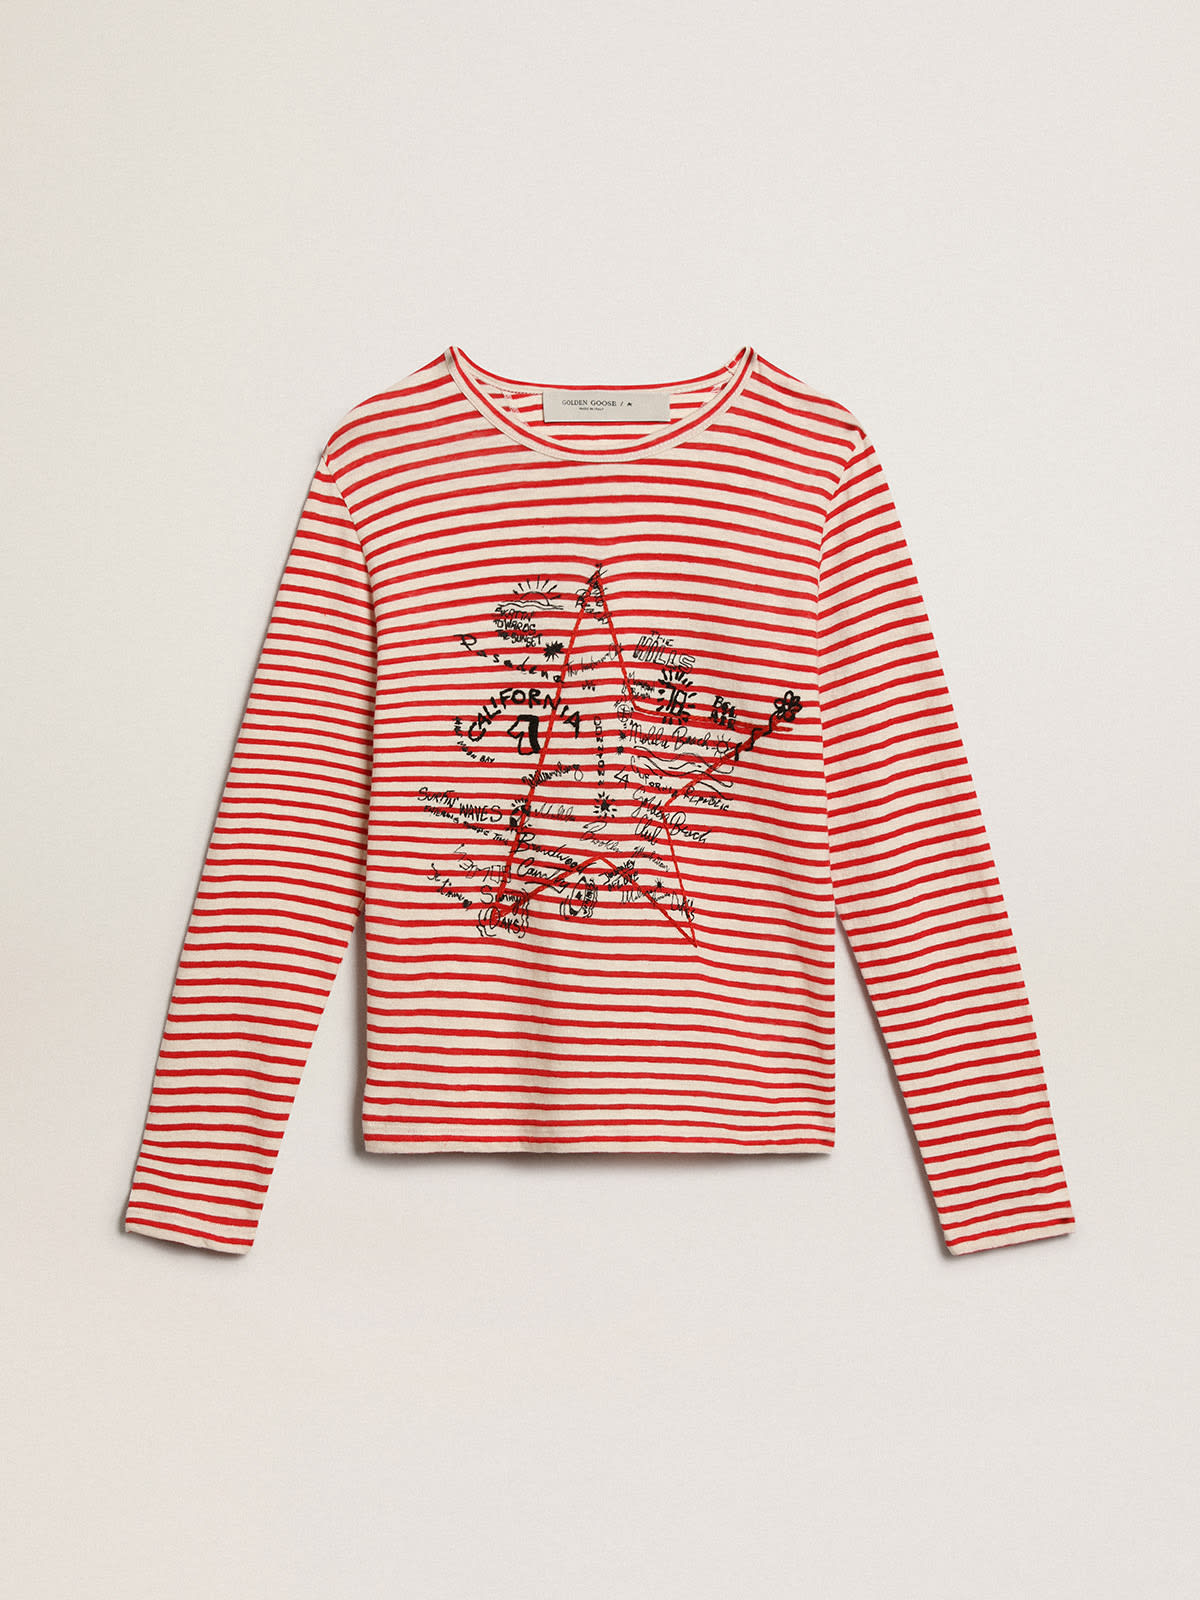 Golden Goose - T-shirt with white and red stripes and embroidery on the front in 